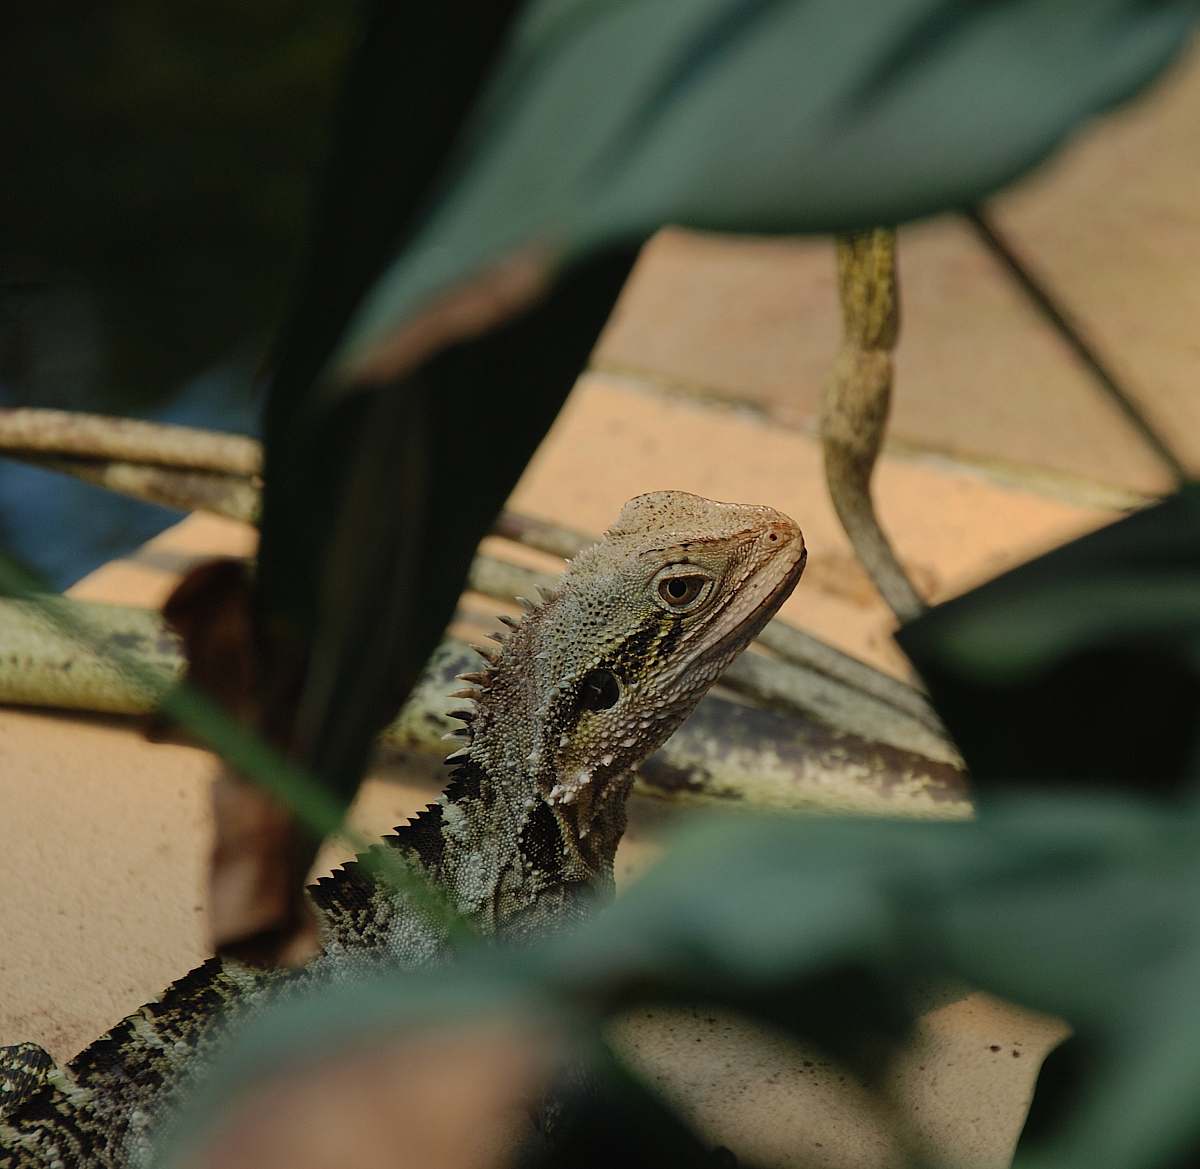 Albums 93+ Images is a bearded dragon an iguana Full HD, 2k, 4k